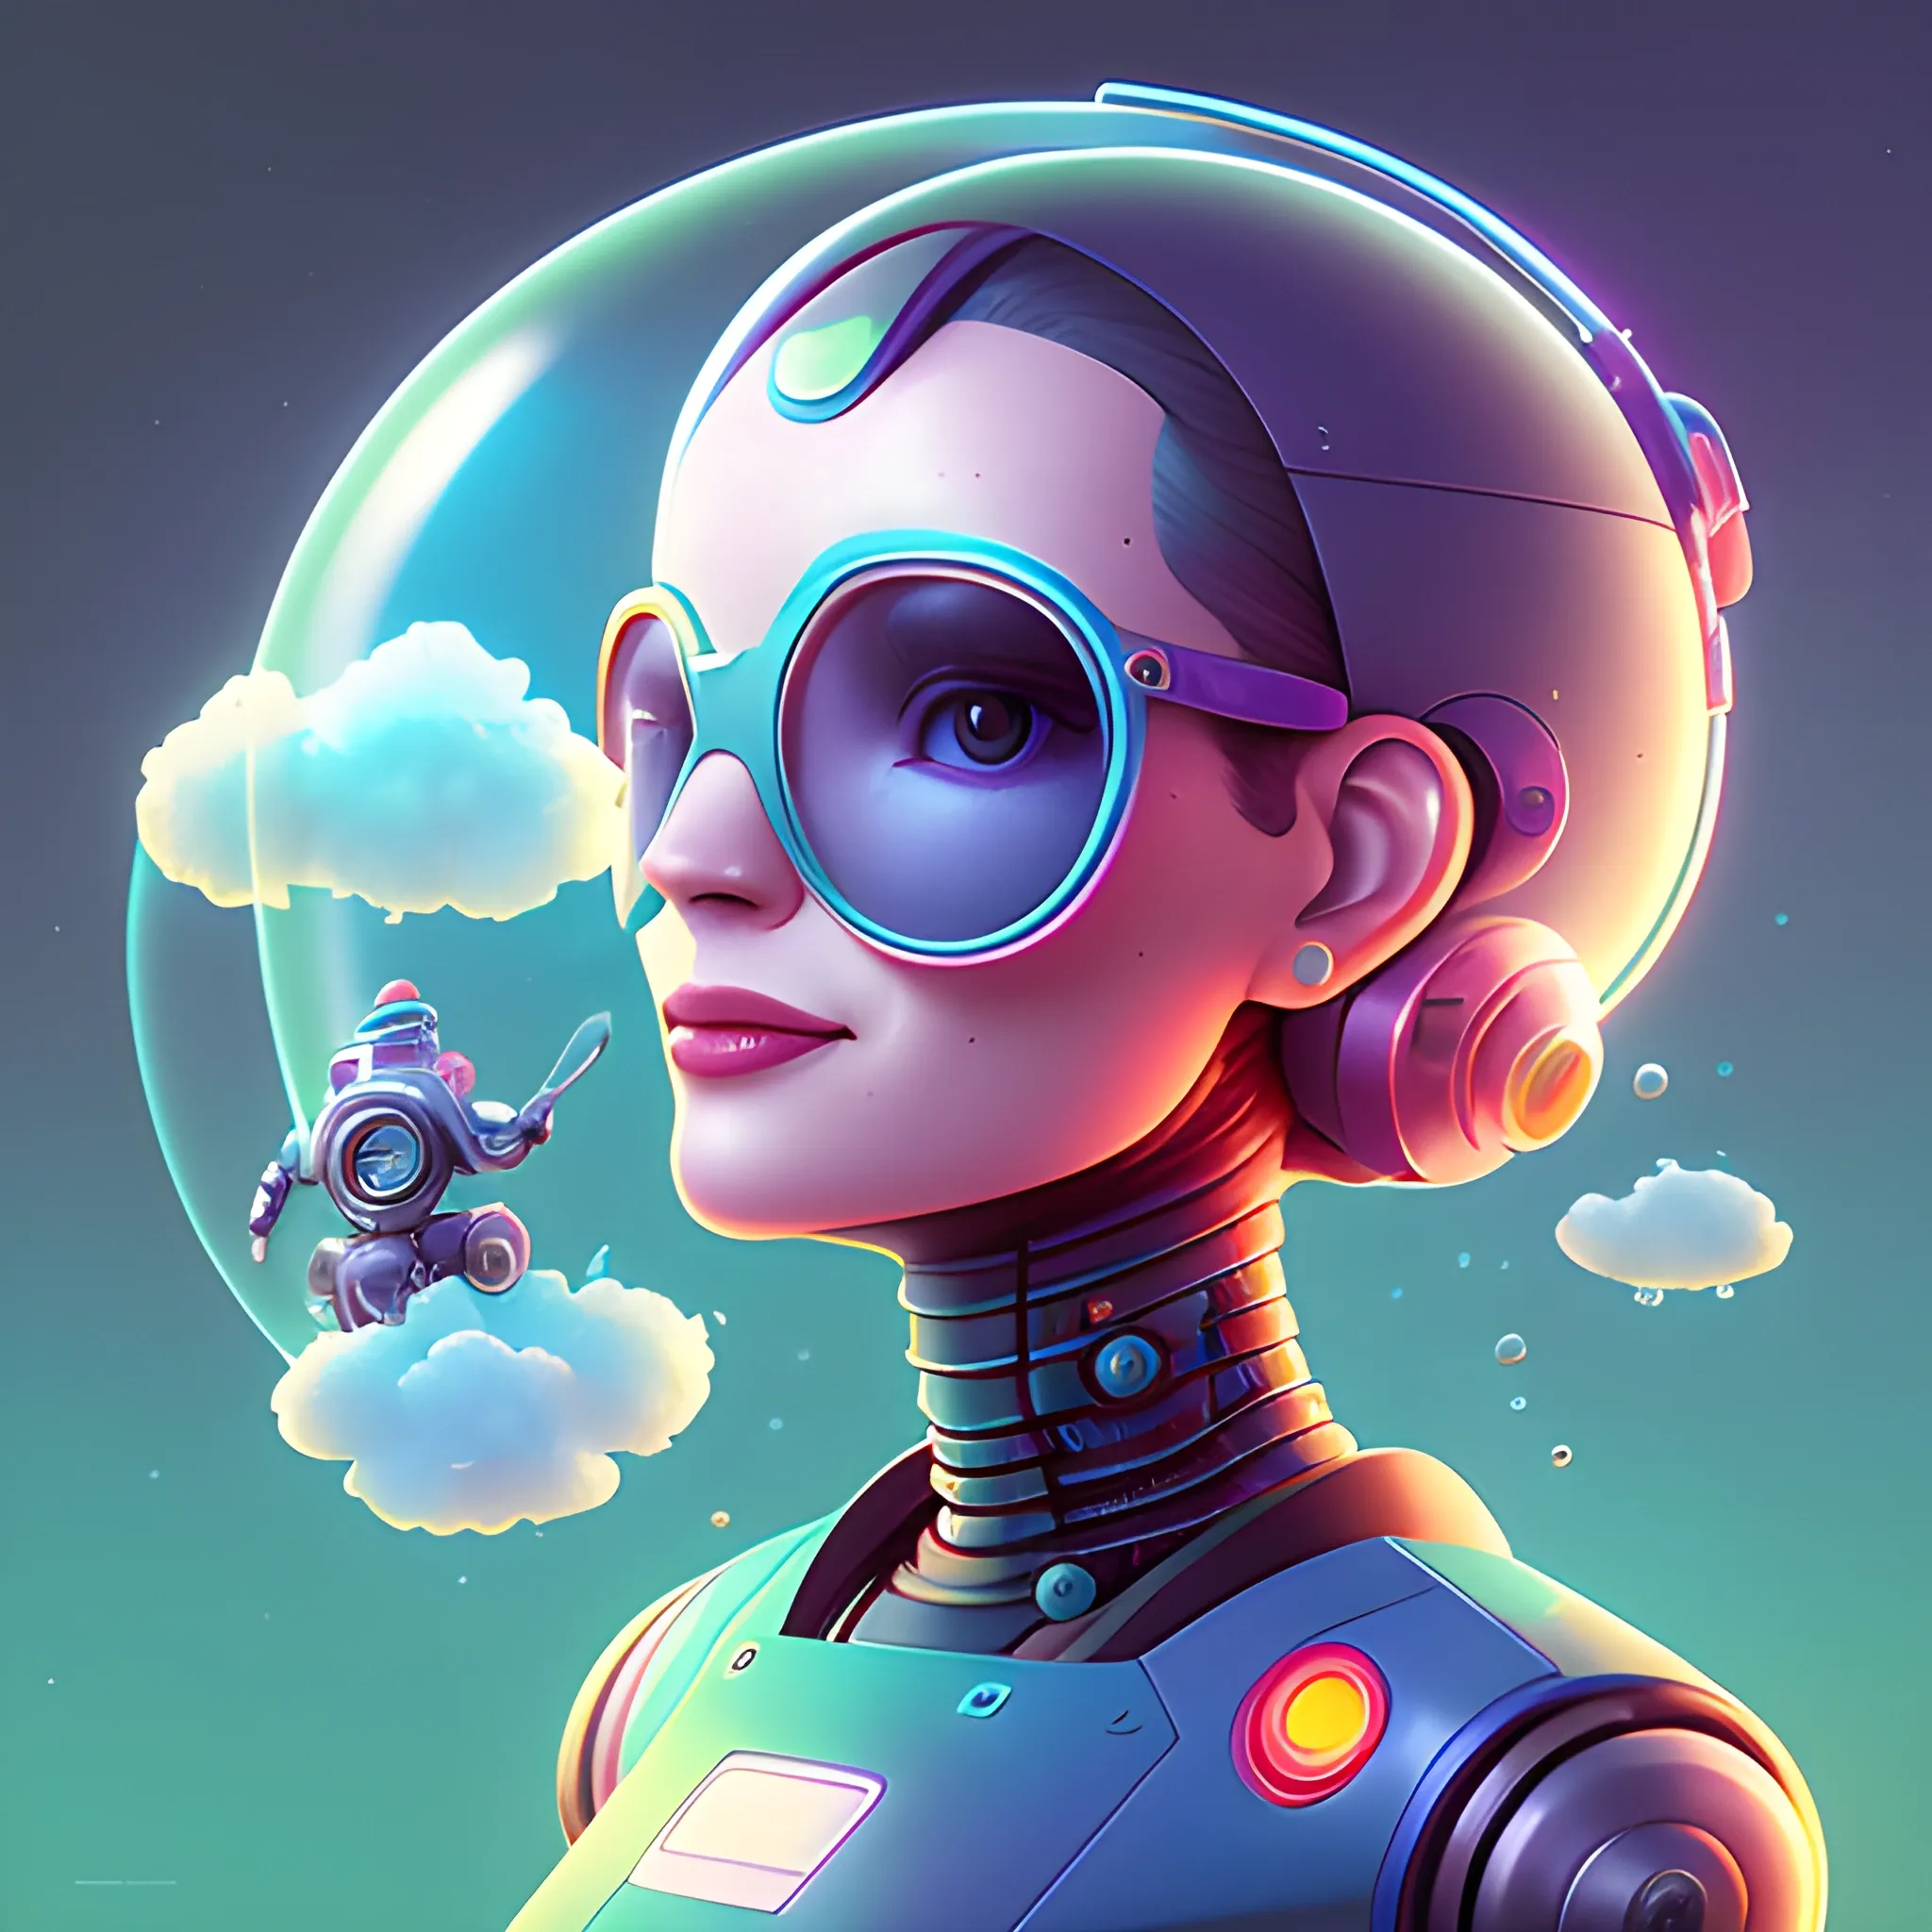 Friendly female robot avatar with government or institutional vibes. Should be cheerful, knowledgeable, and smiling. by petros afshar, ross tran, Tom Bagshaw, tom whalen, underwater bubbly psychedelic clouds, Anaglyph 3D lens blur effect
